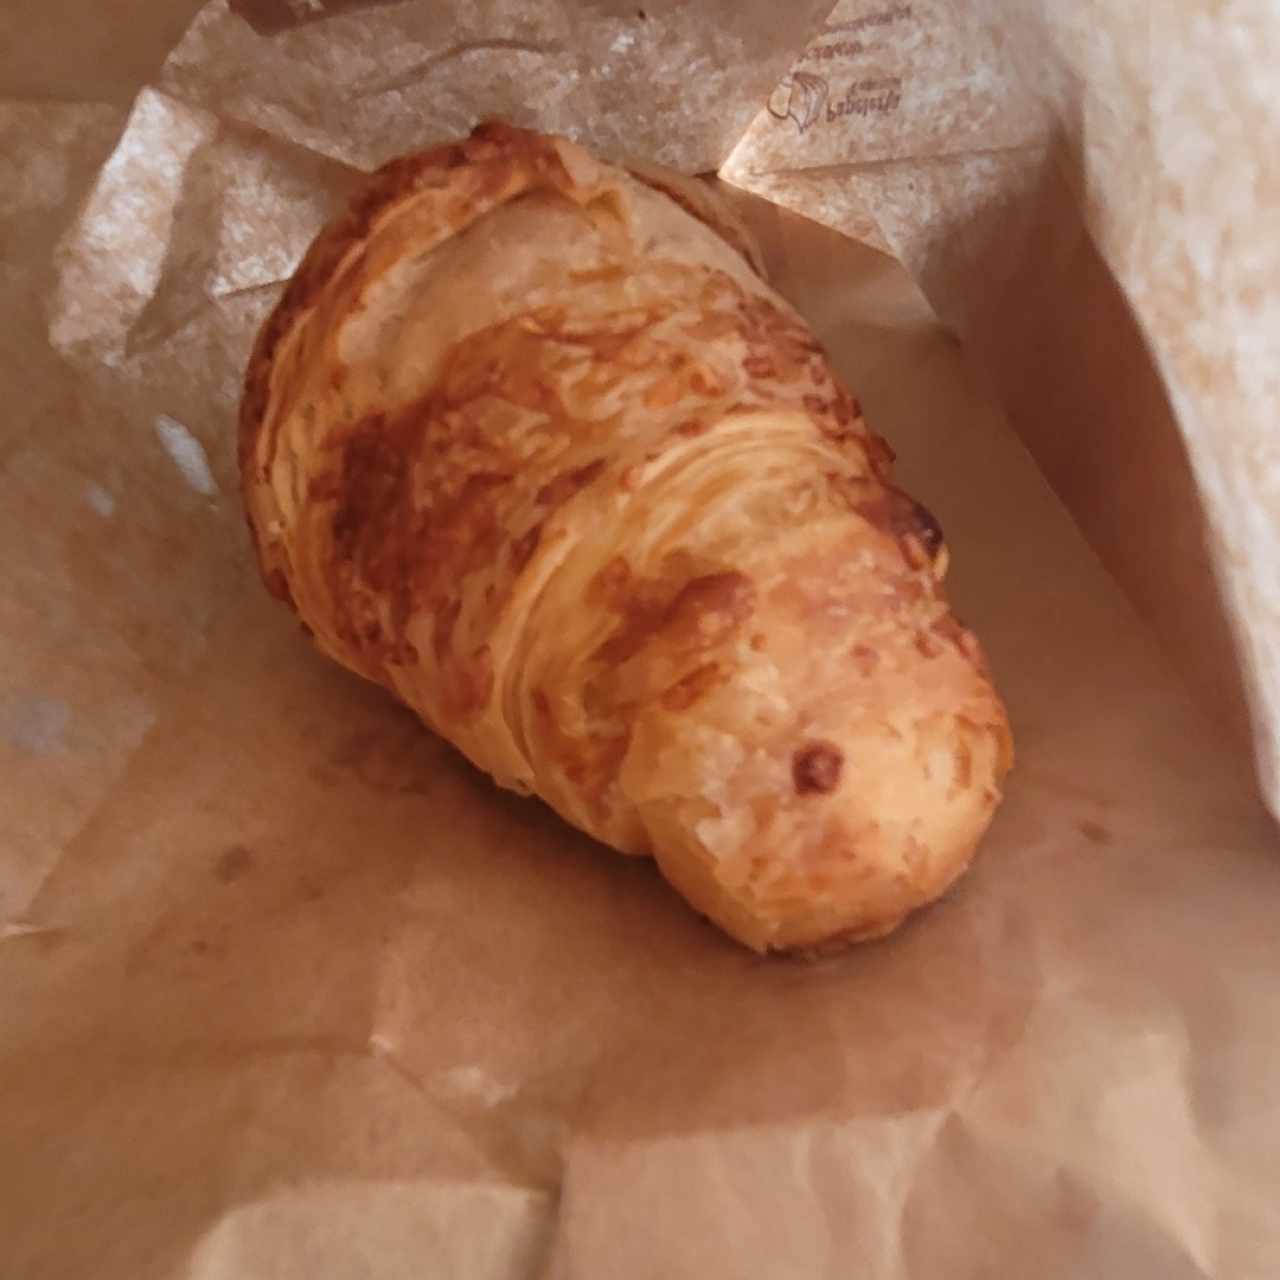 croissant jamón y queso 